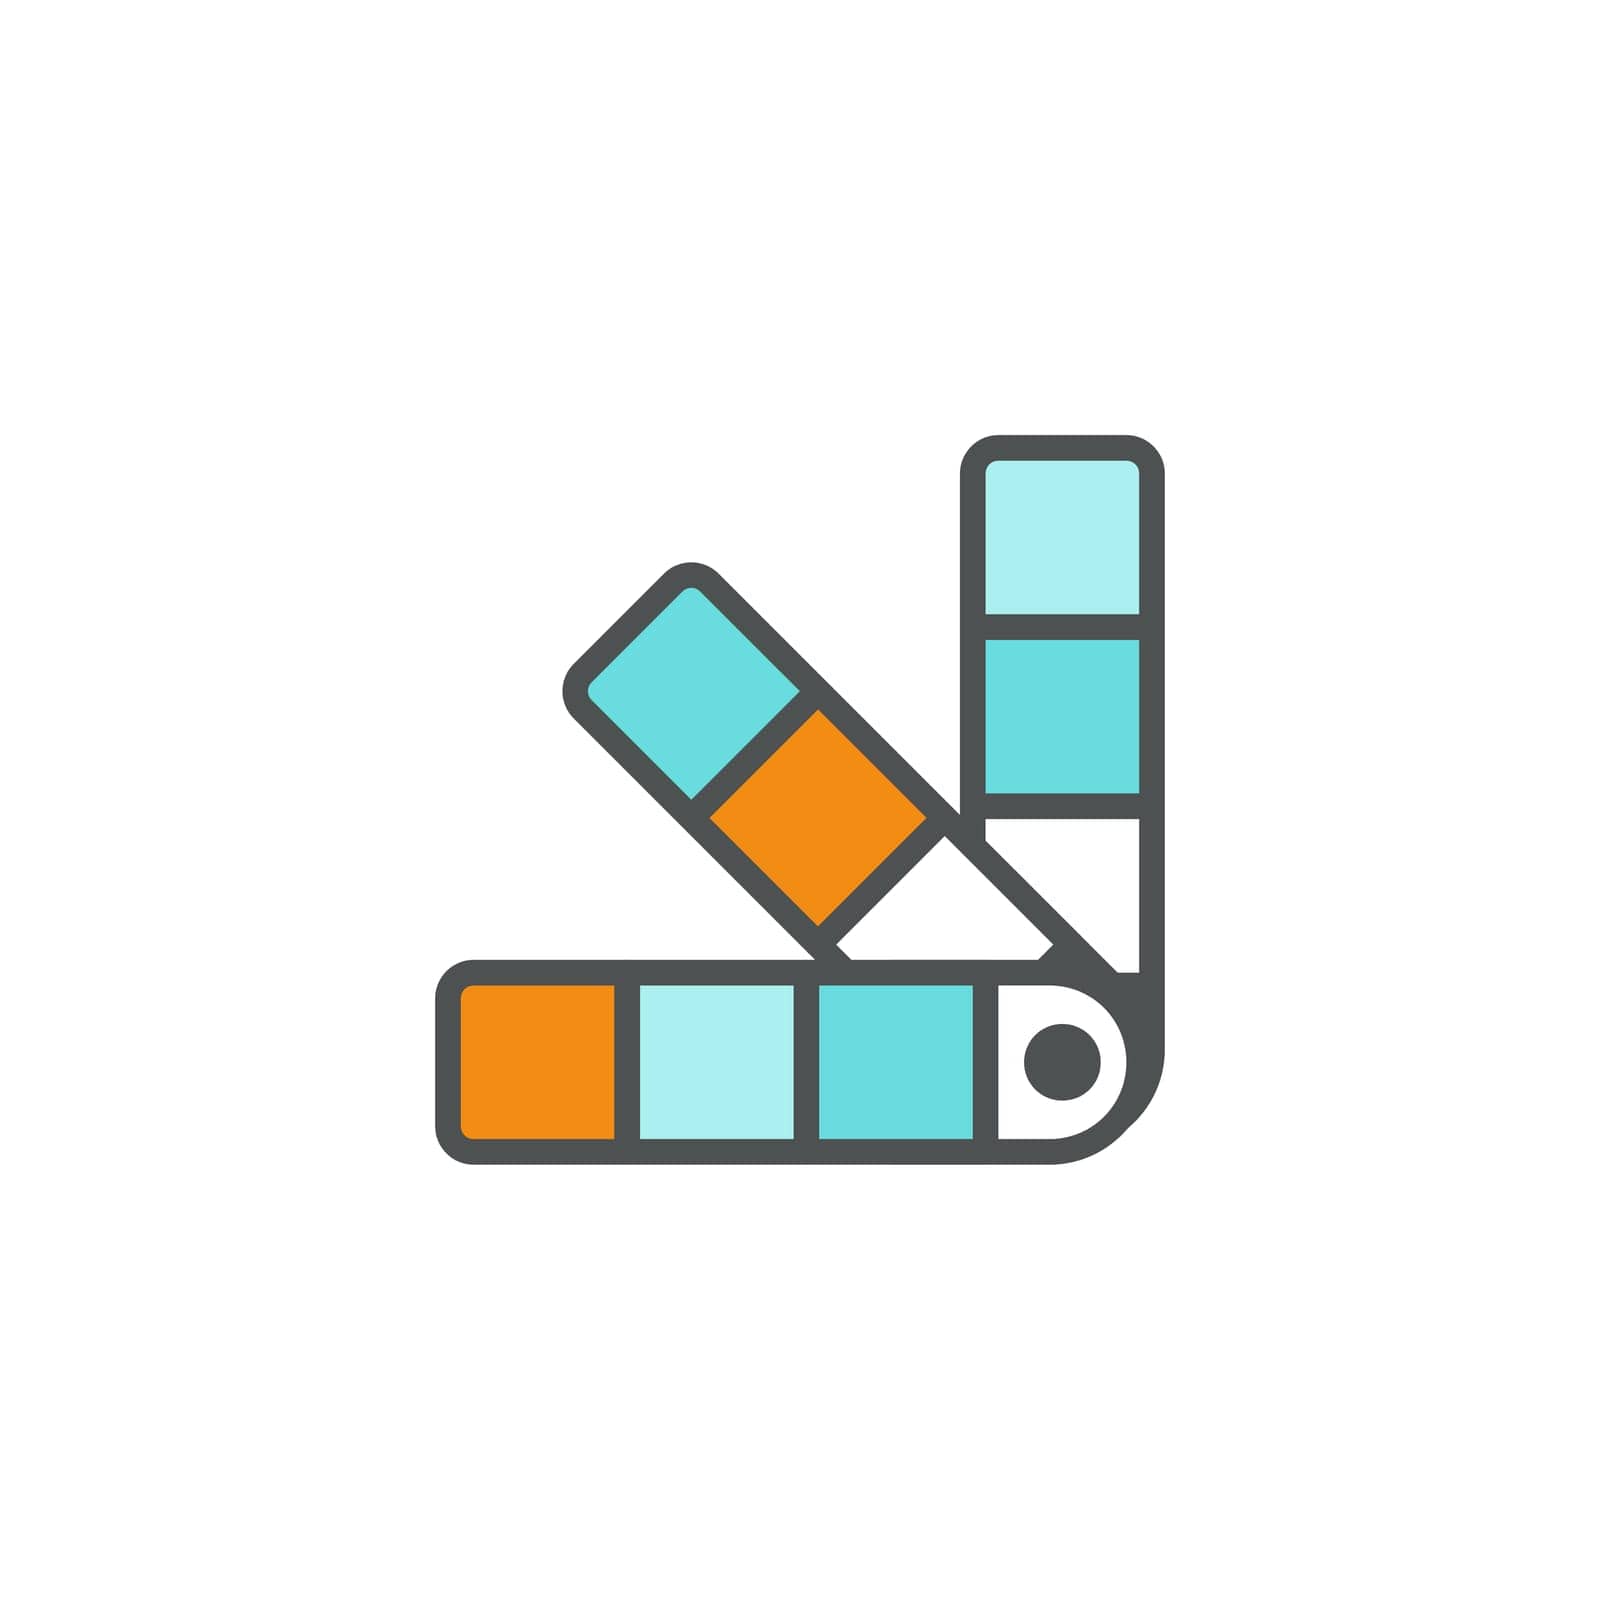 This icon is suitable for representing colors and the use of color palettes in the design or product development process.